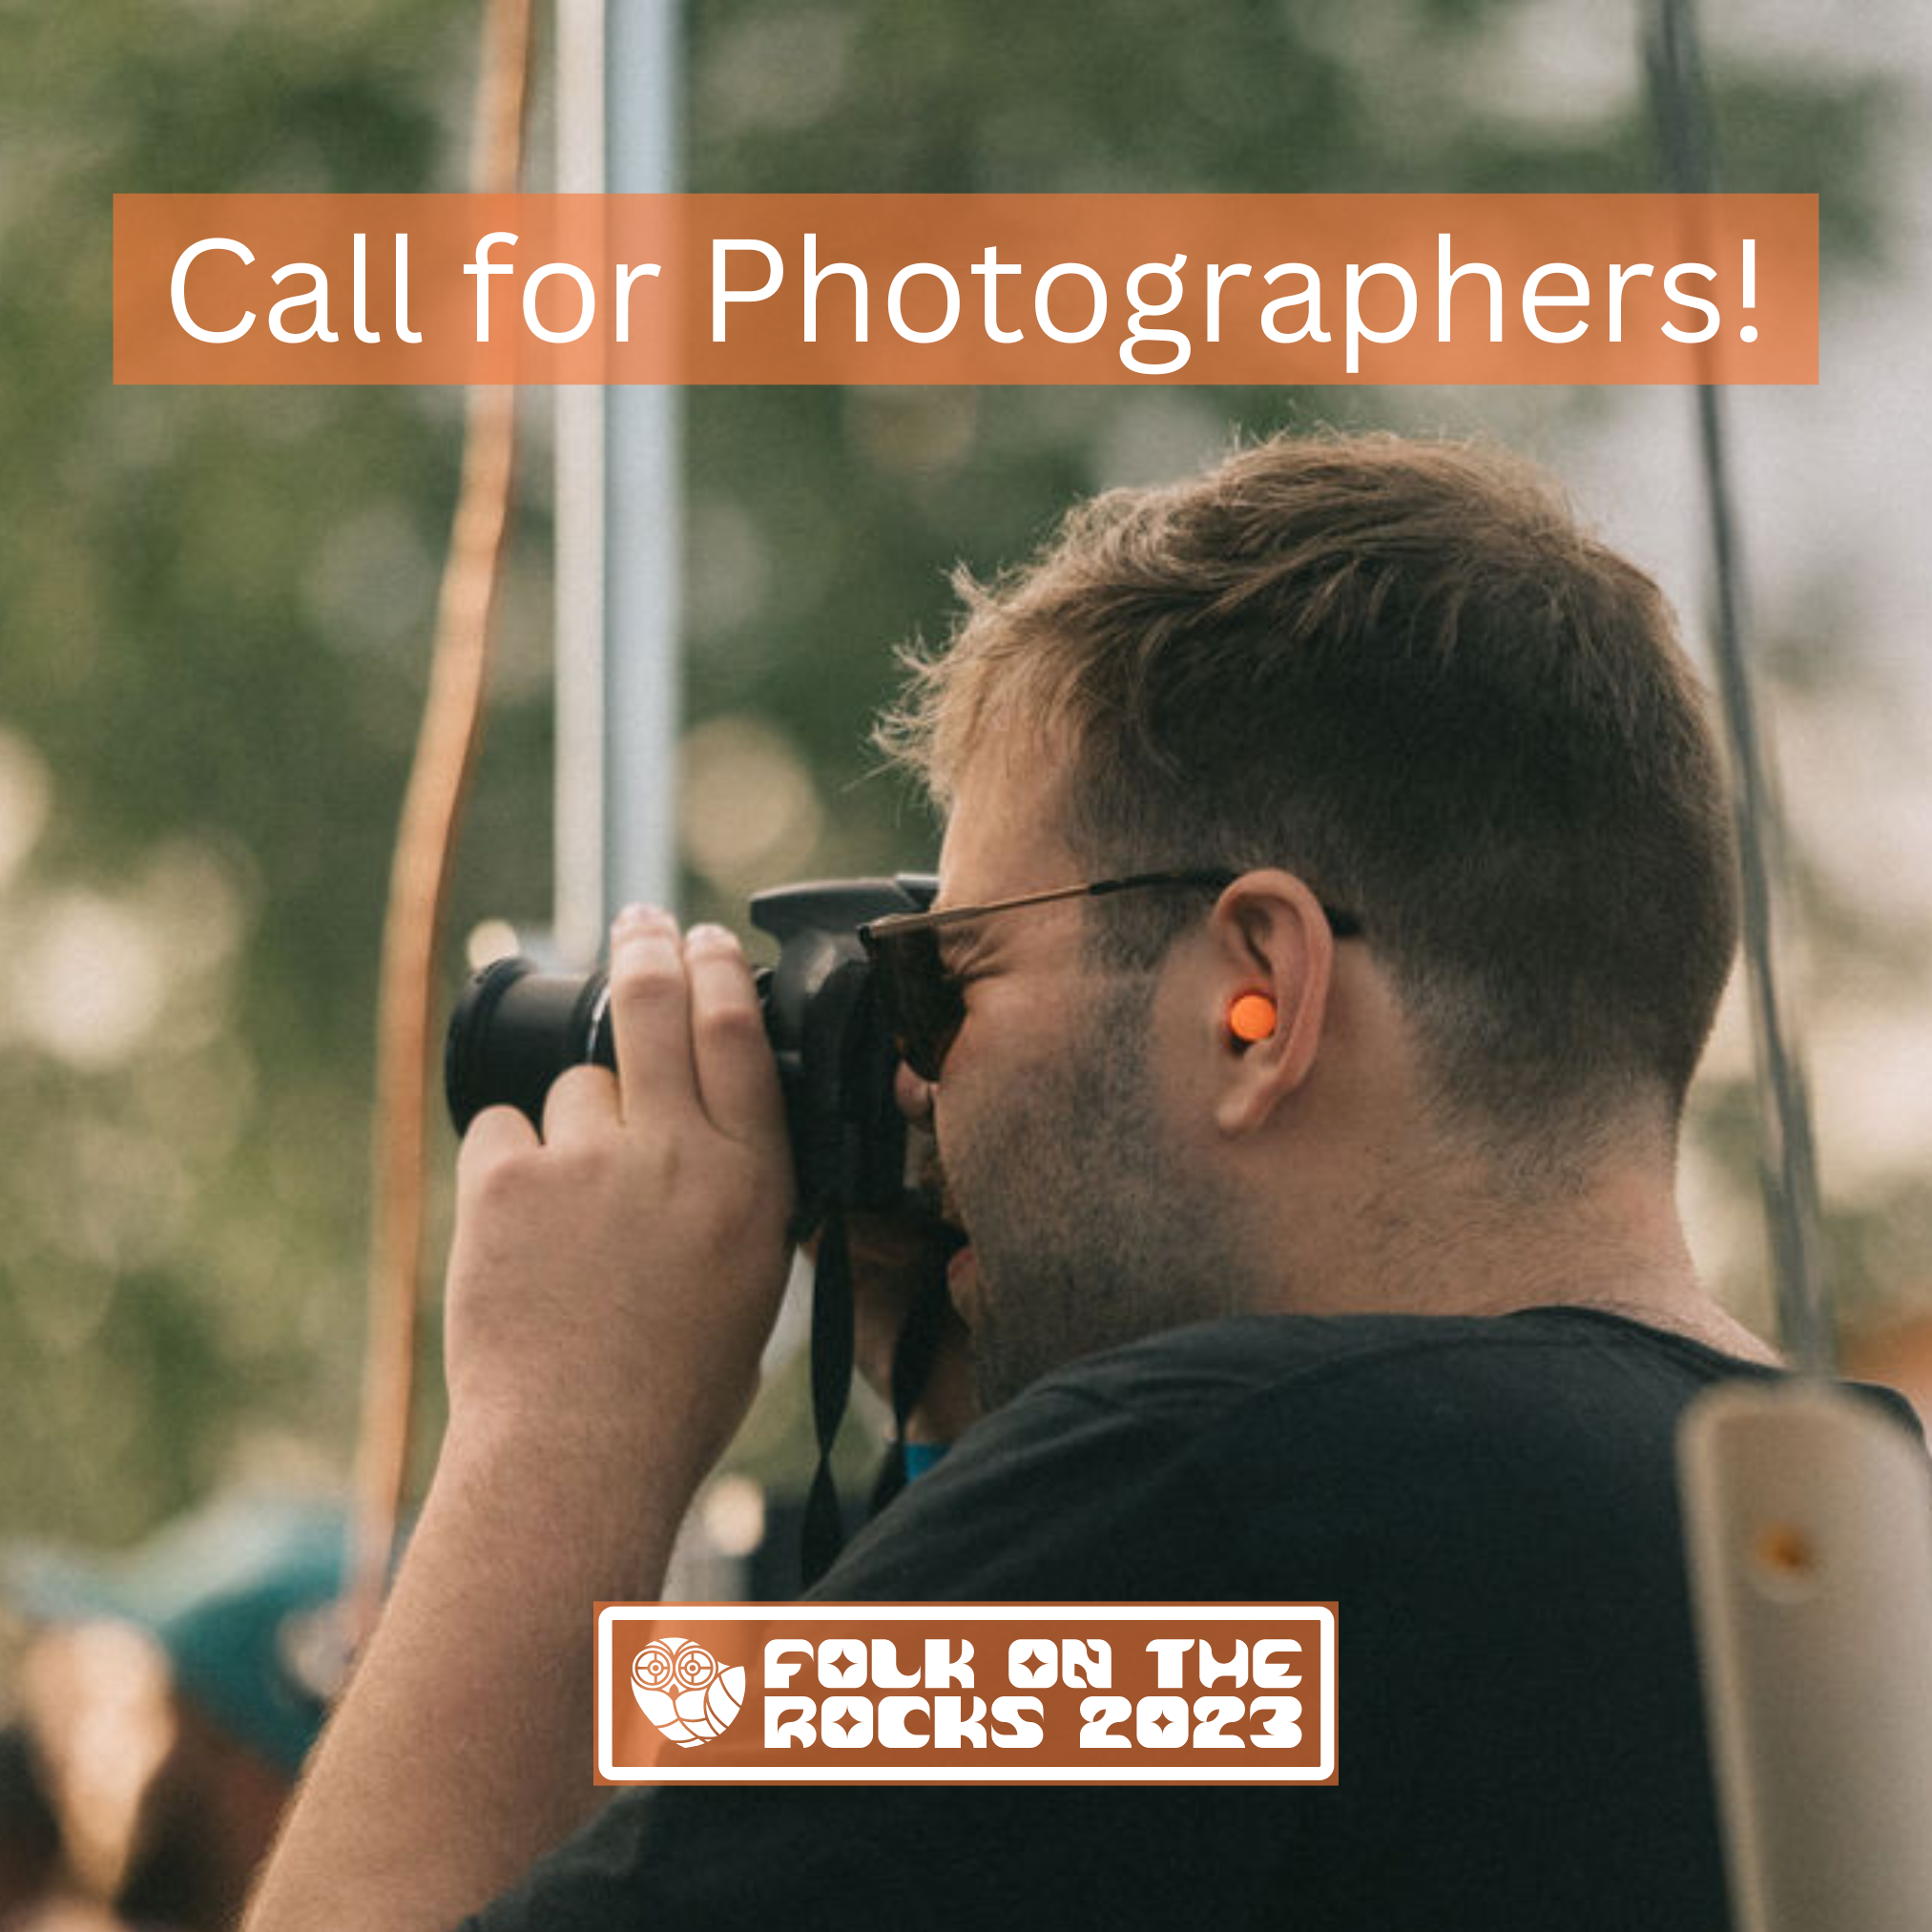 Call for photographers!